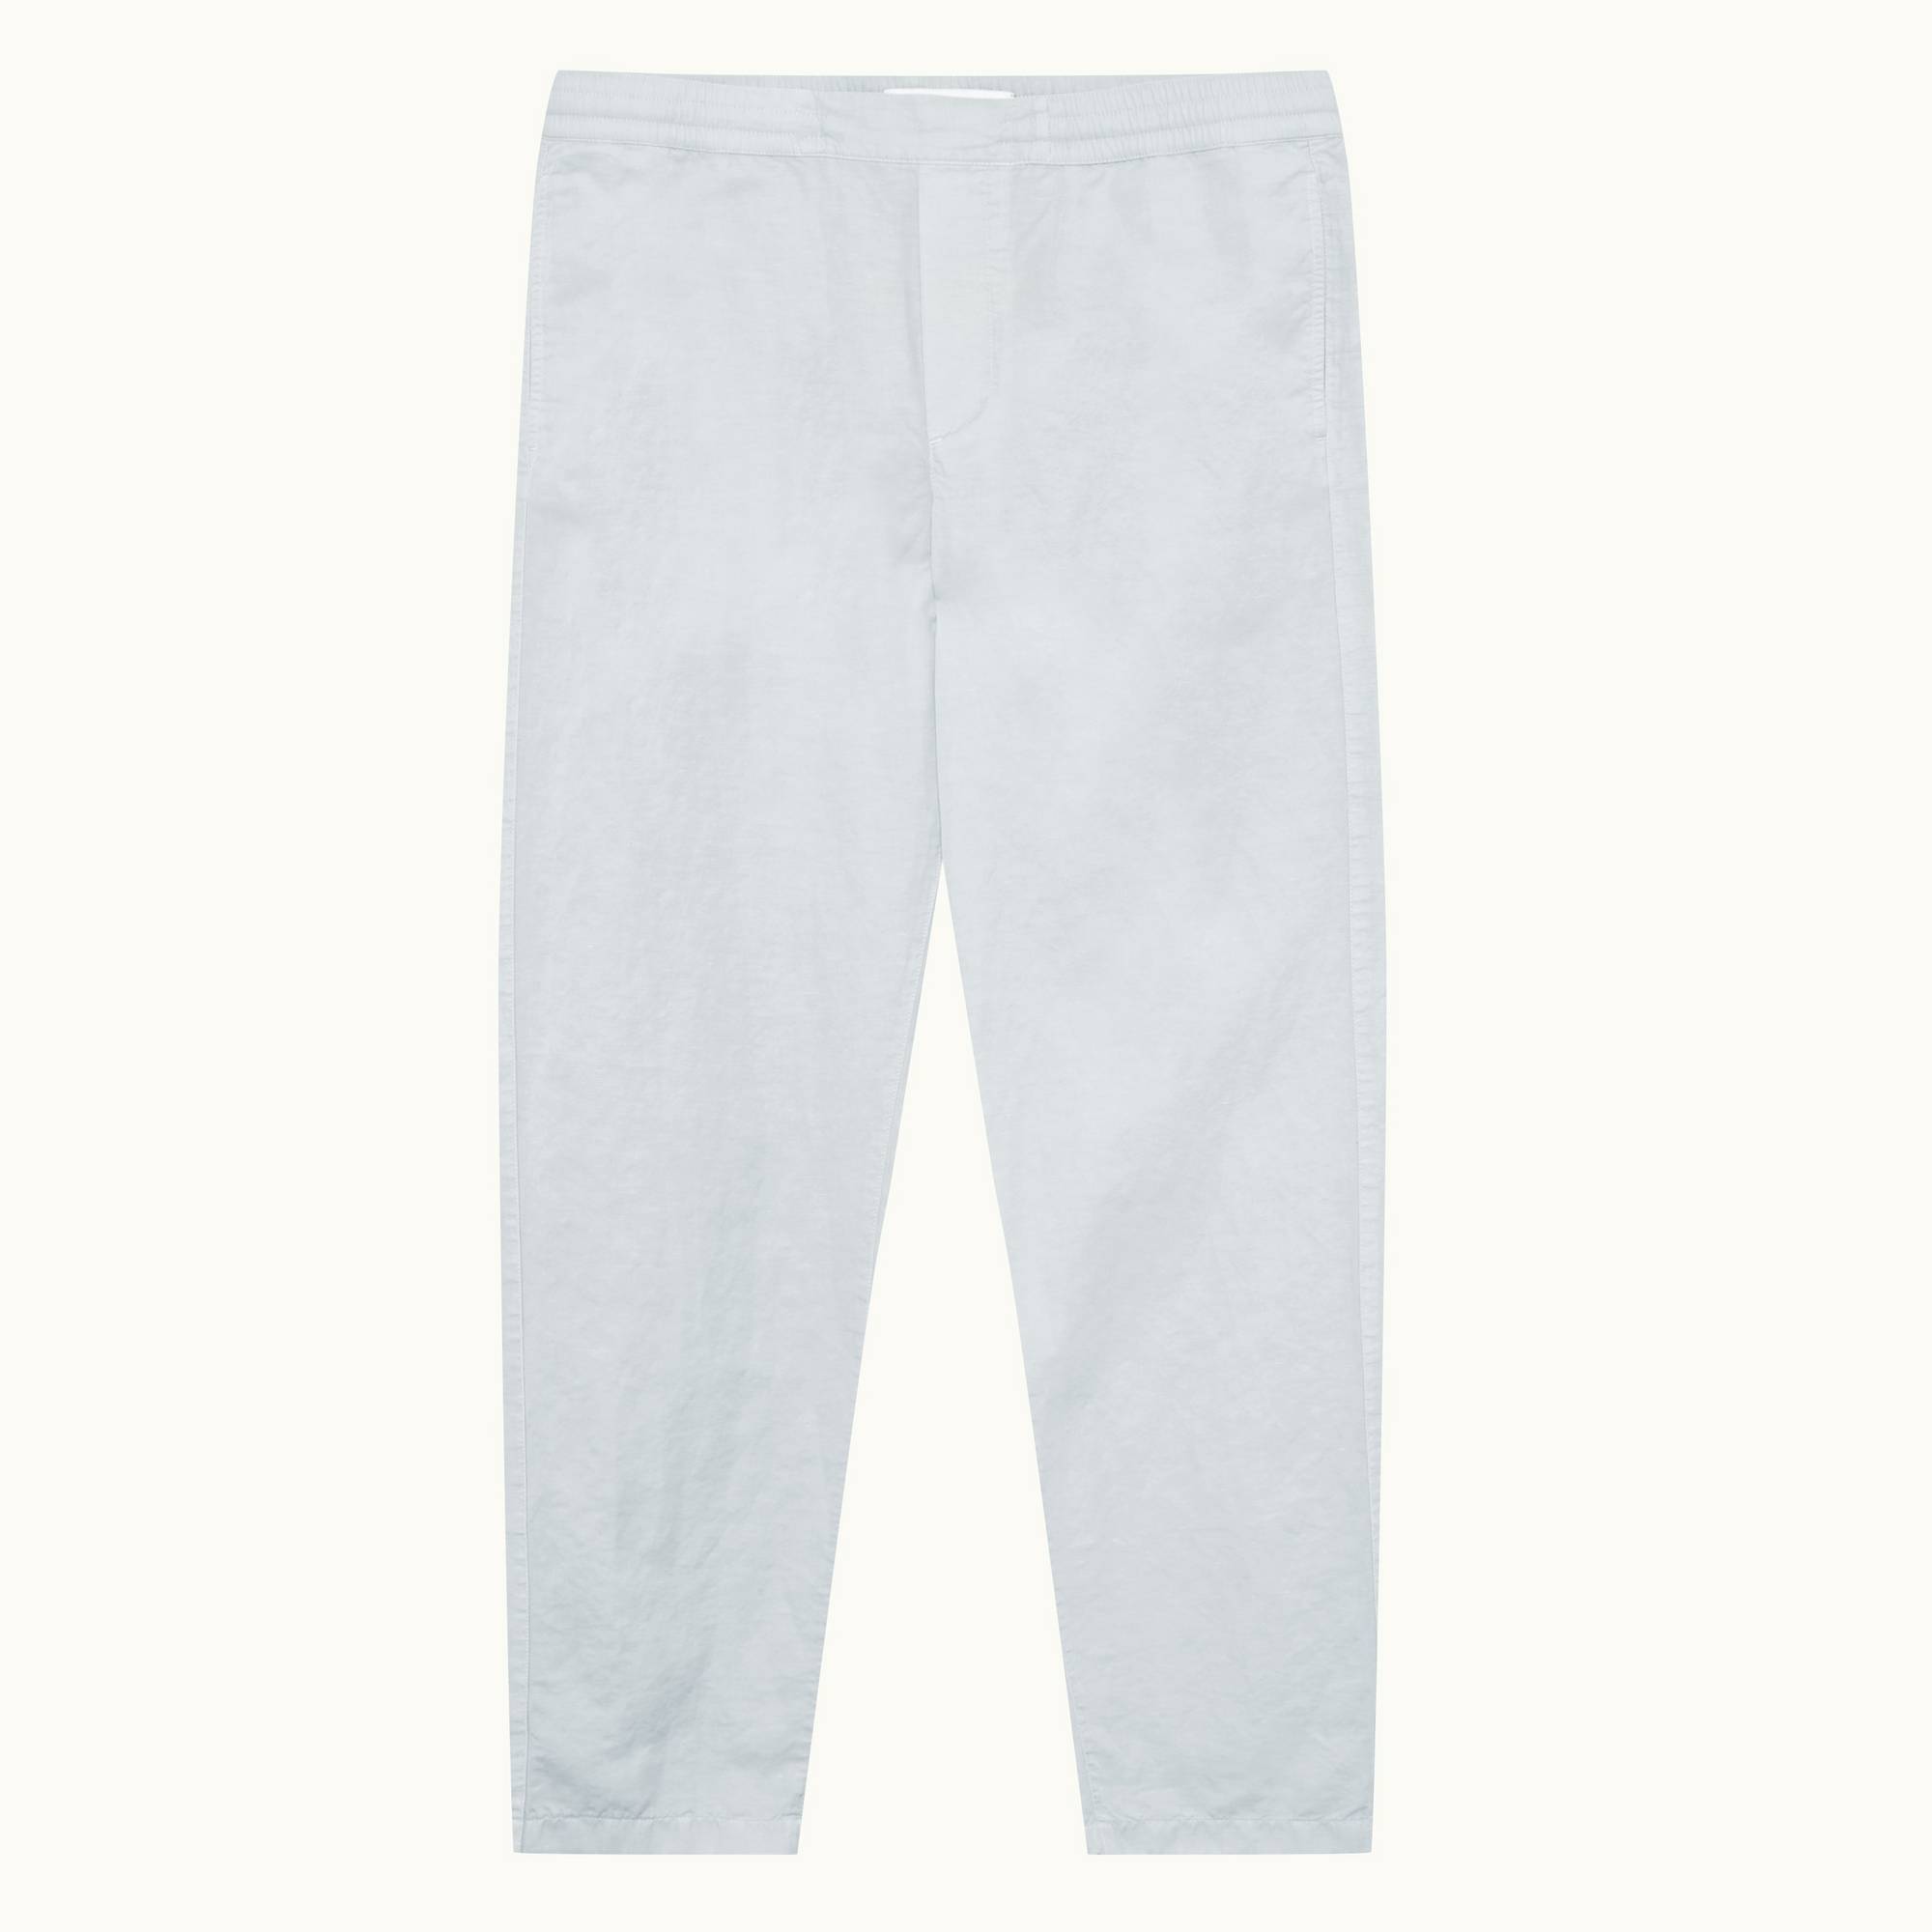 Sonoran - Mens Serenity Blue Relaxed Fit Cotton-Linen Trousers